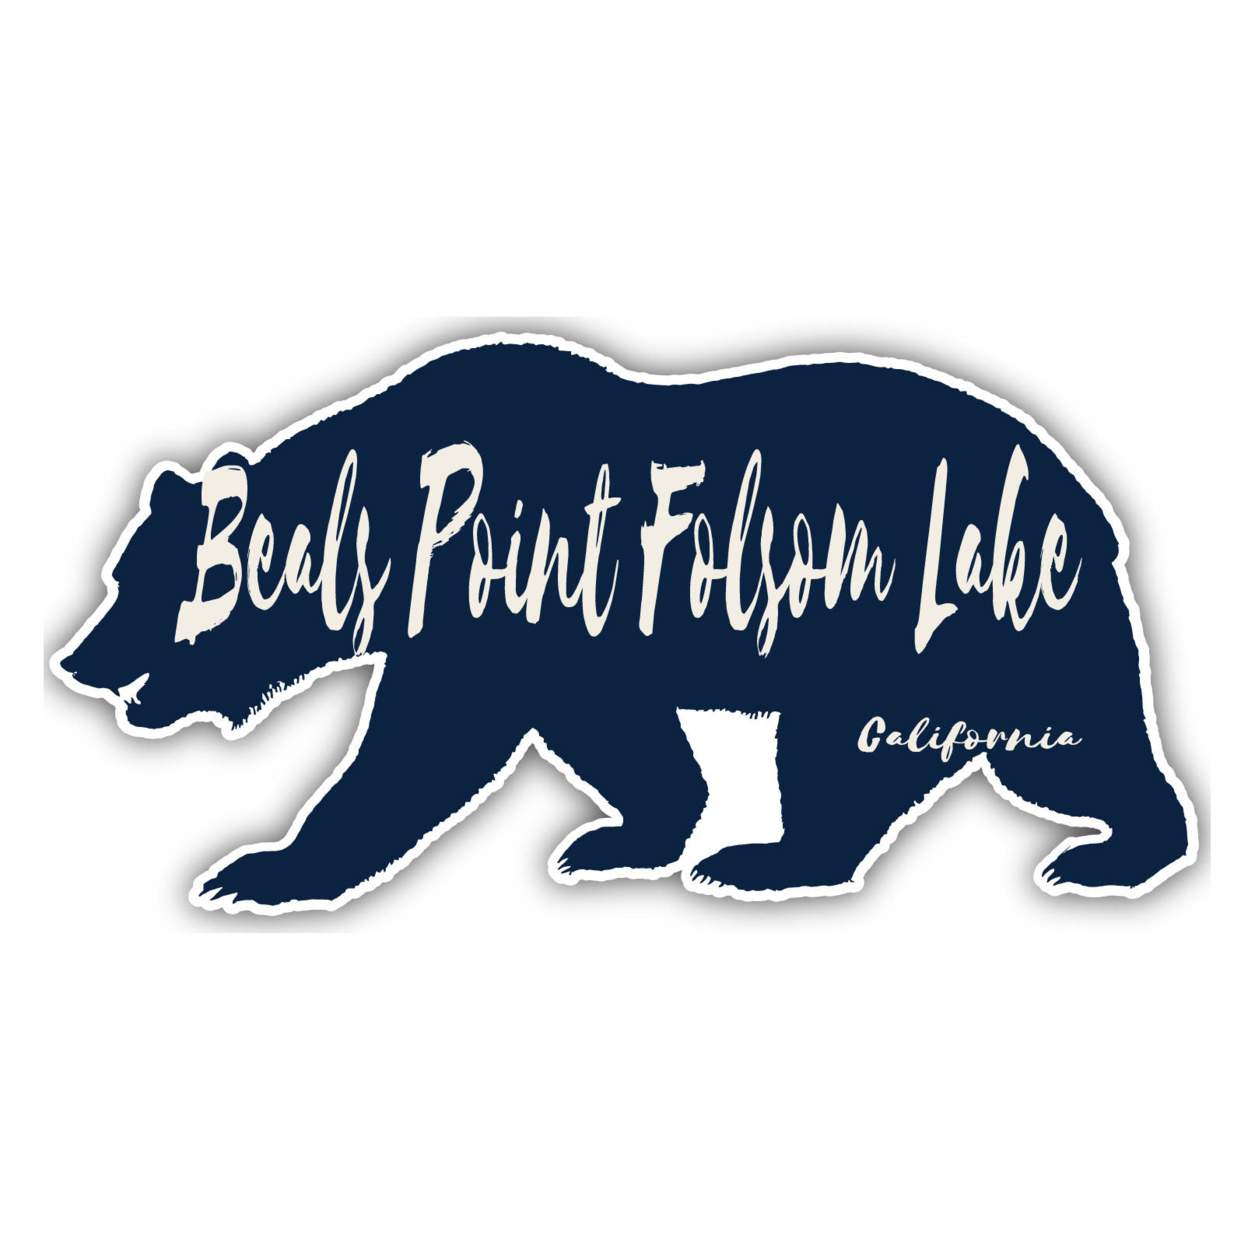 Beals Point Folsom Lake California Souvenir Decorative Stickers (Choose Theme And Size) - Single Unit, 4-Inch, Camp Life